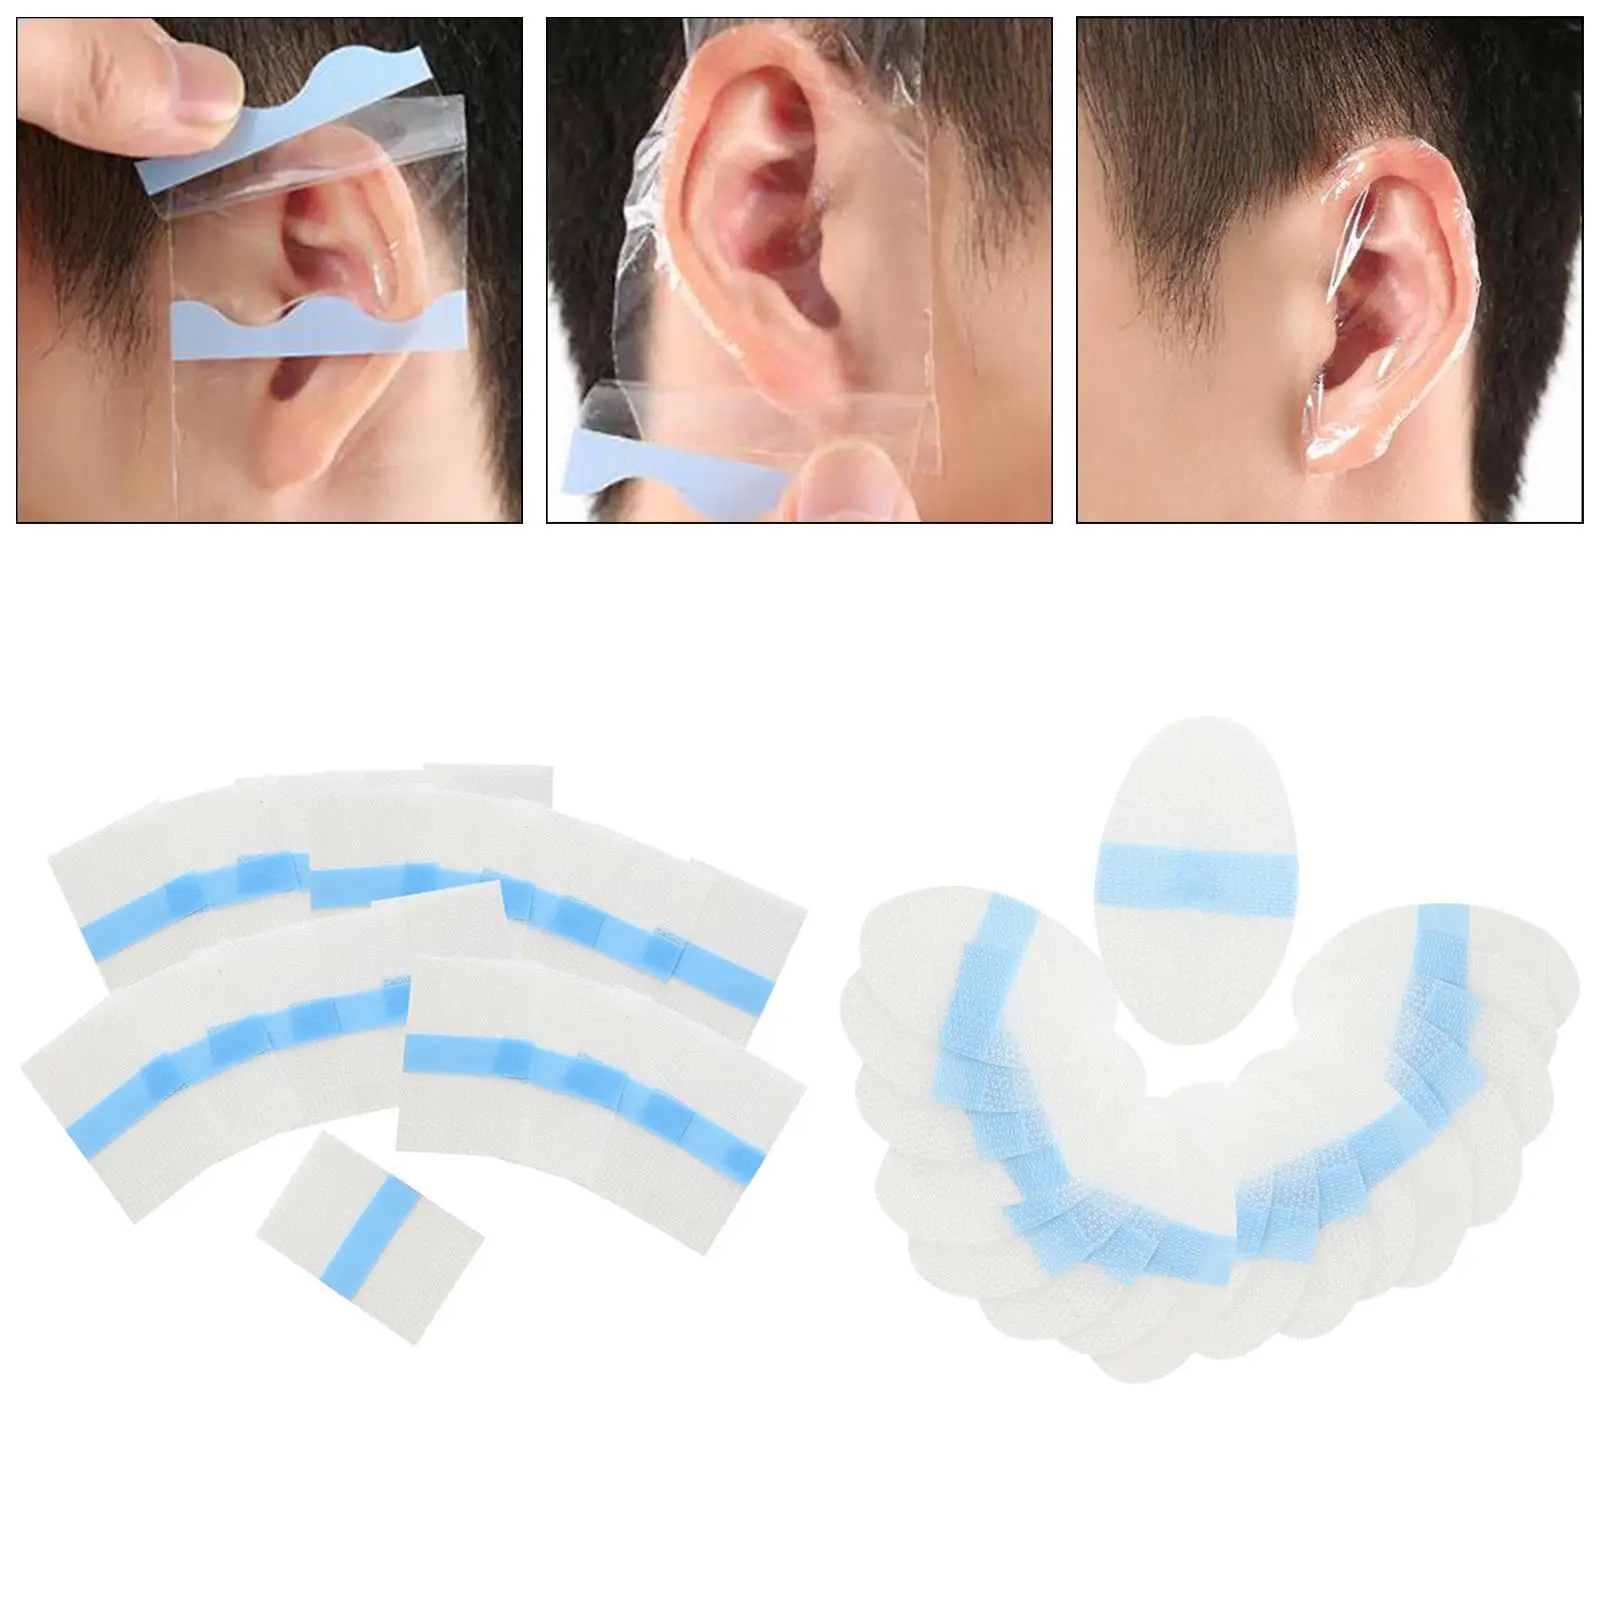 20 Pieces Waterproof Ear Stickers Ear Covers, Ear Protectors for Shower Swimming